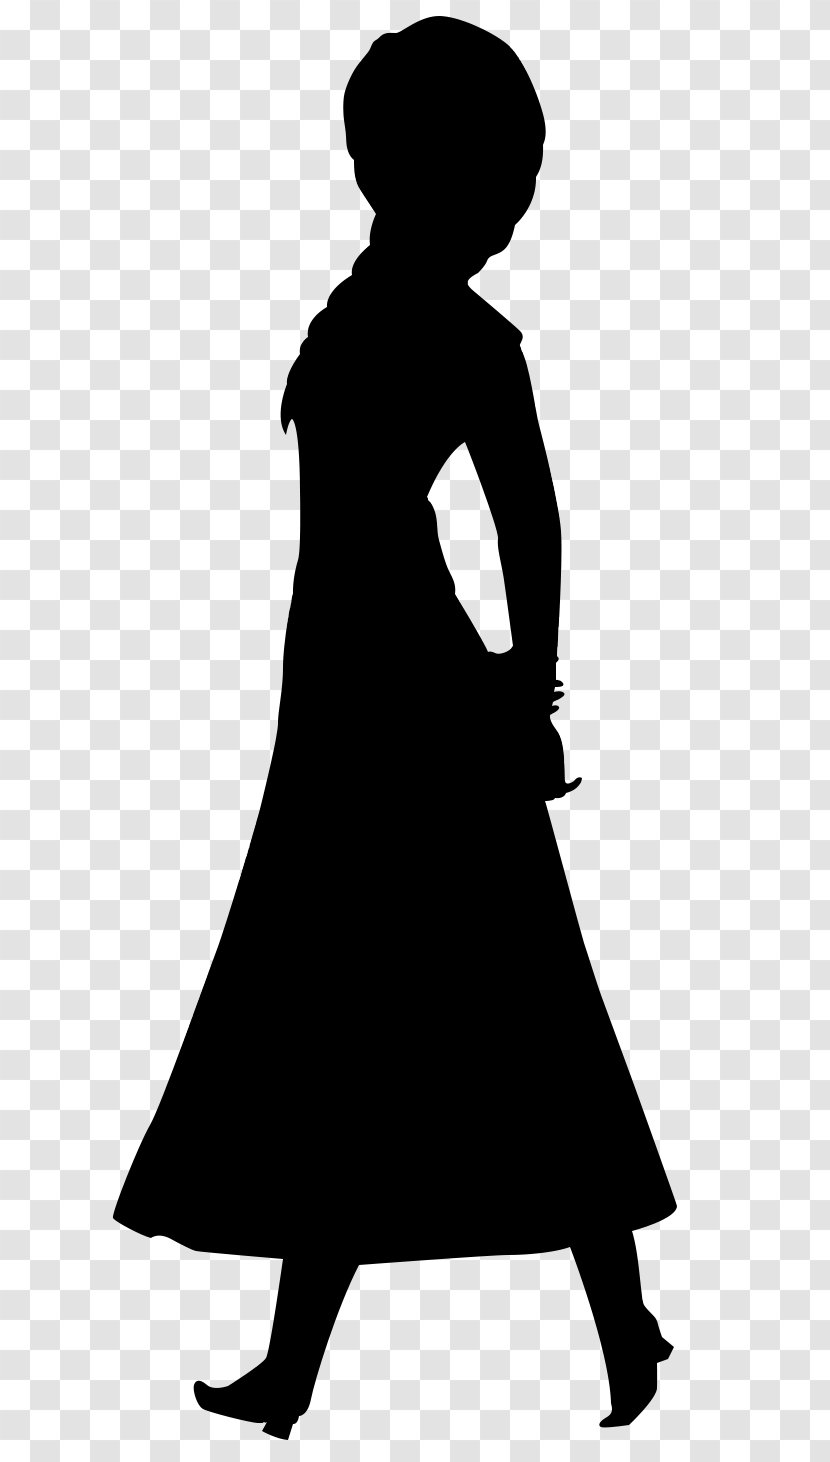 Royalty-free Stock Photography Vector Graphics Illustration - Formal Wear - Sleeve Transparent PNG